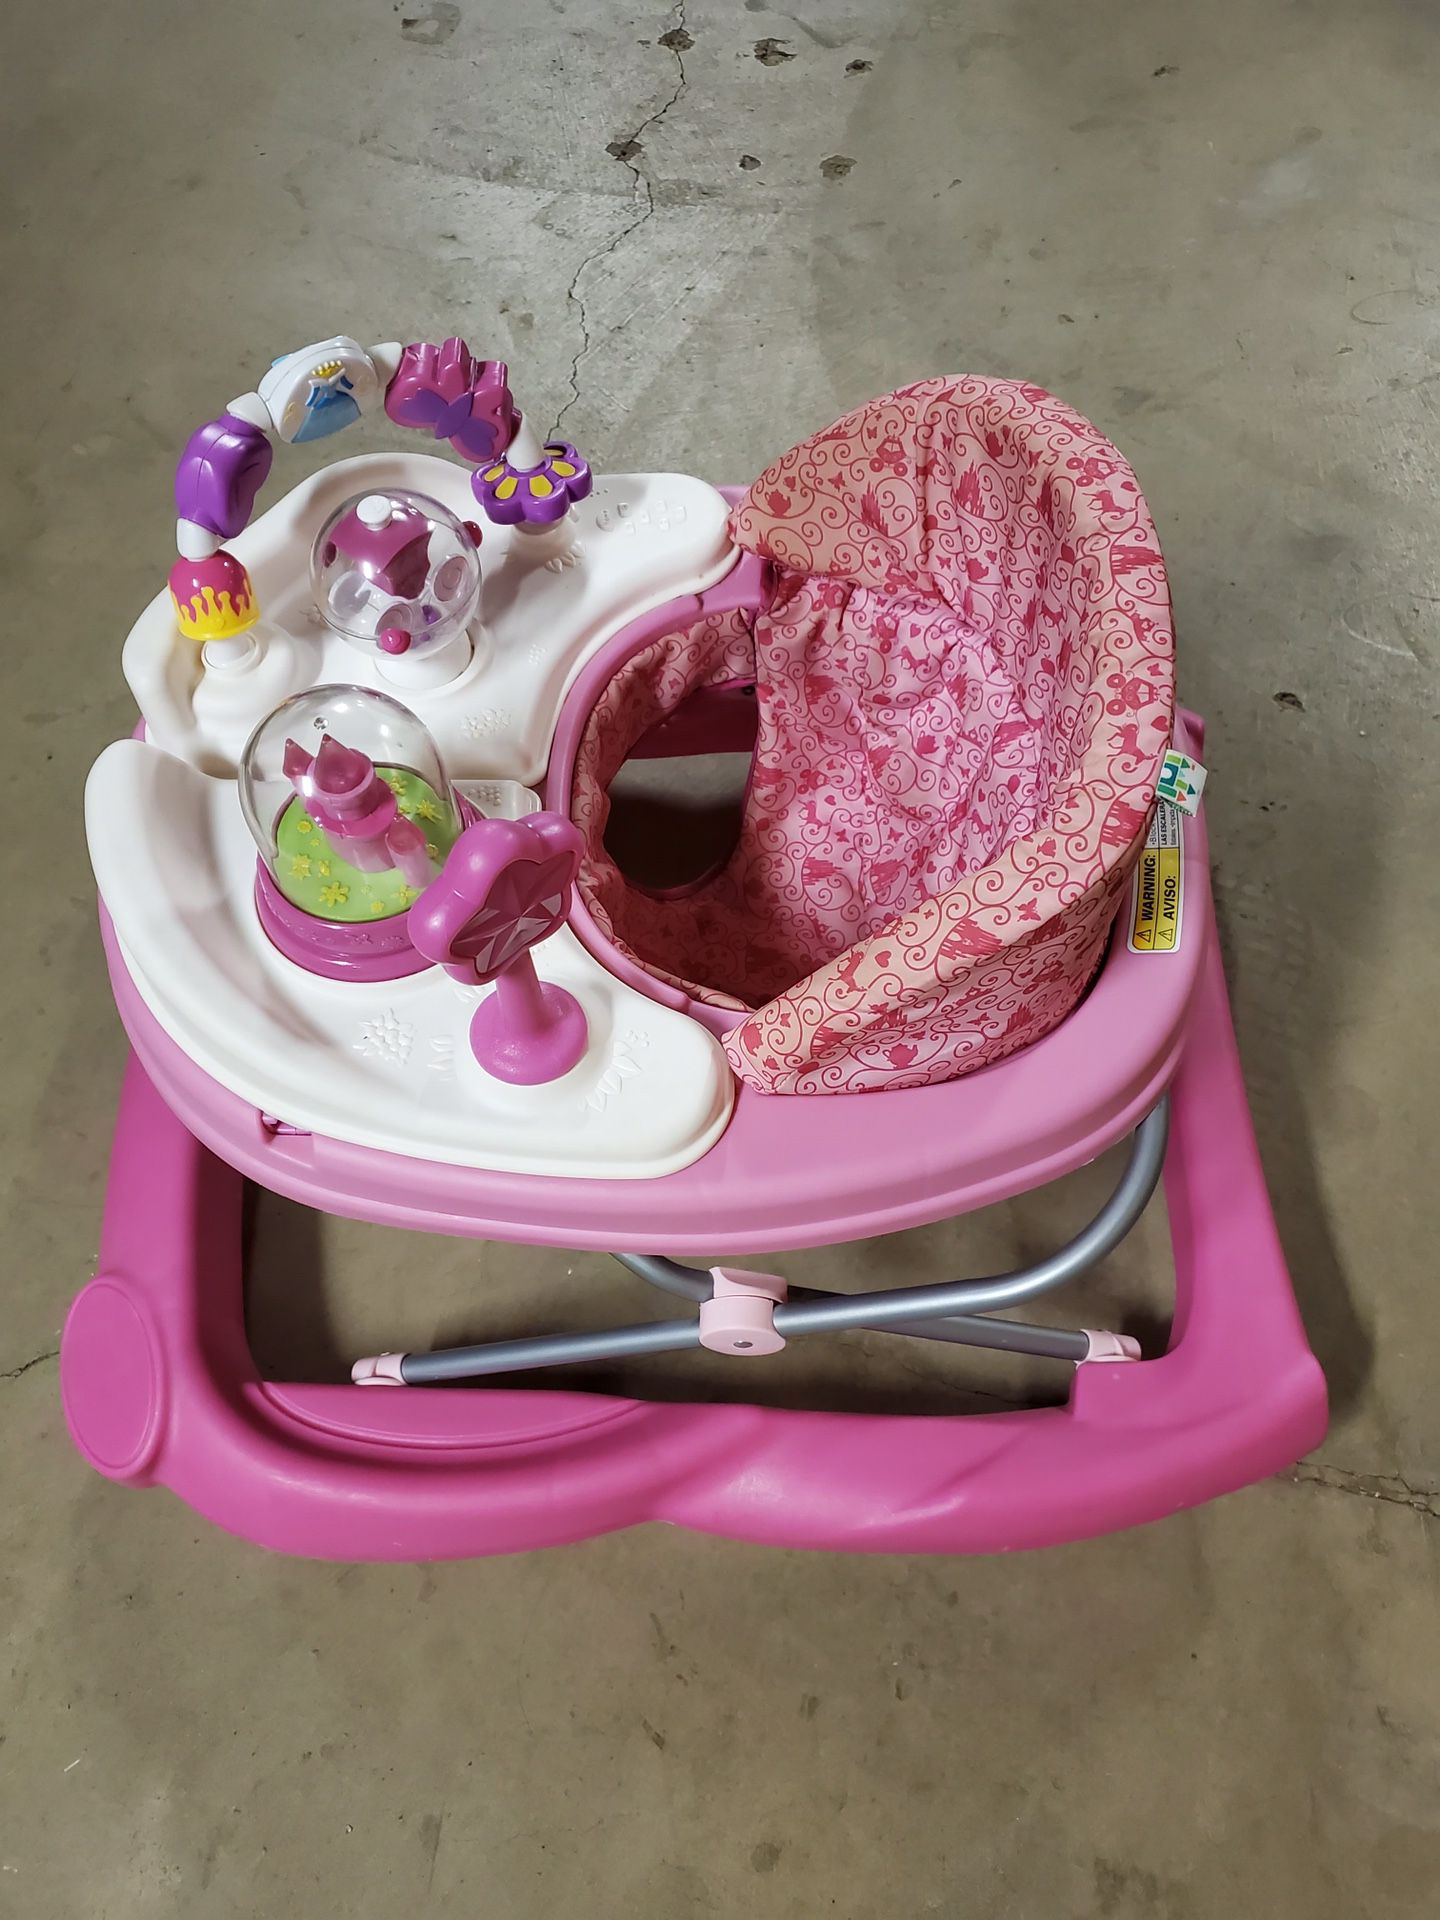 DISNEY Music & Lights Rolling Walker for Baby - firm price.